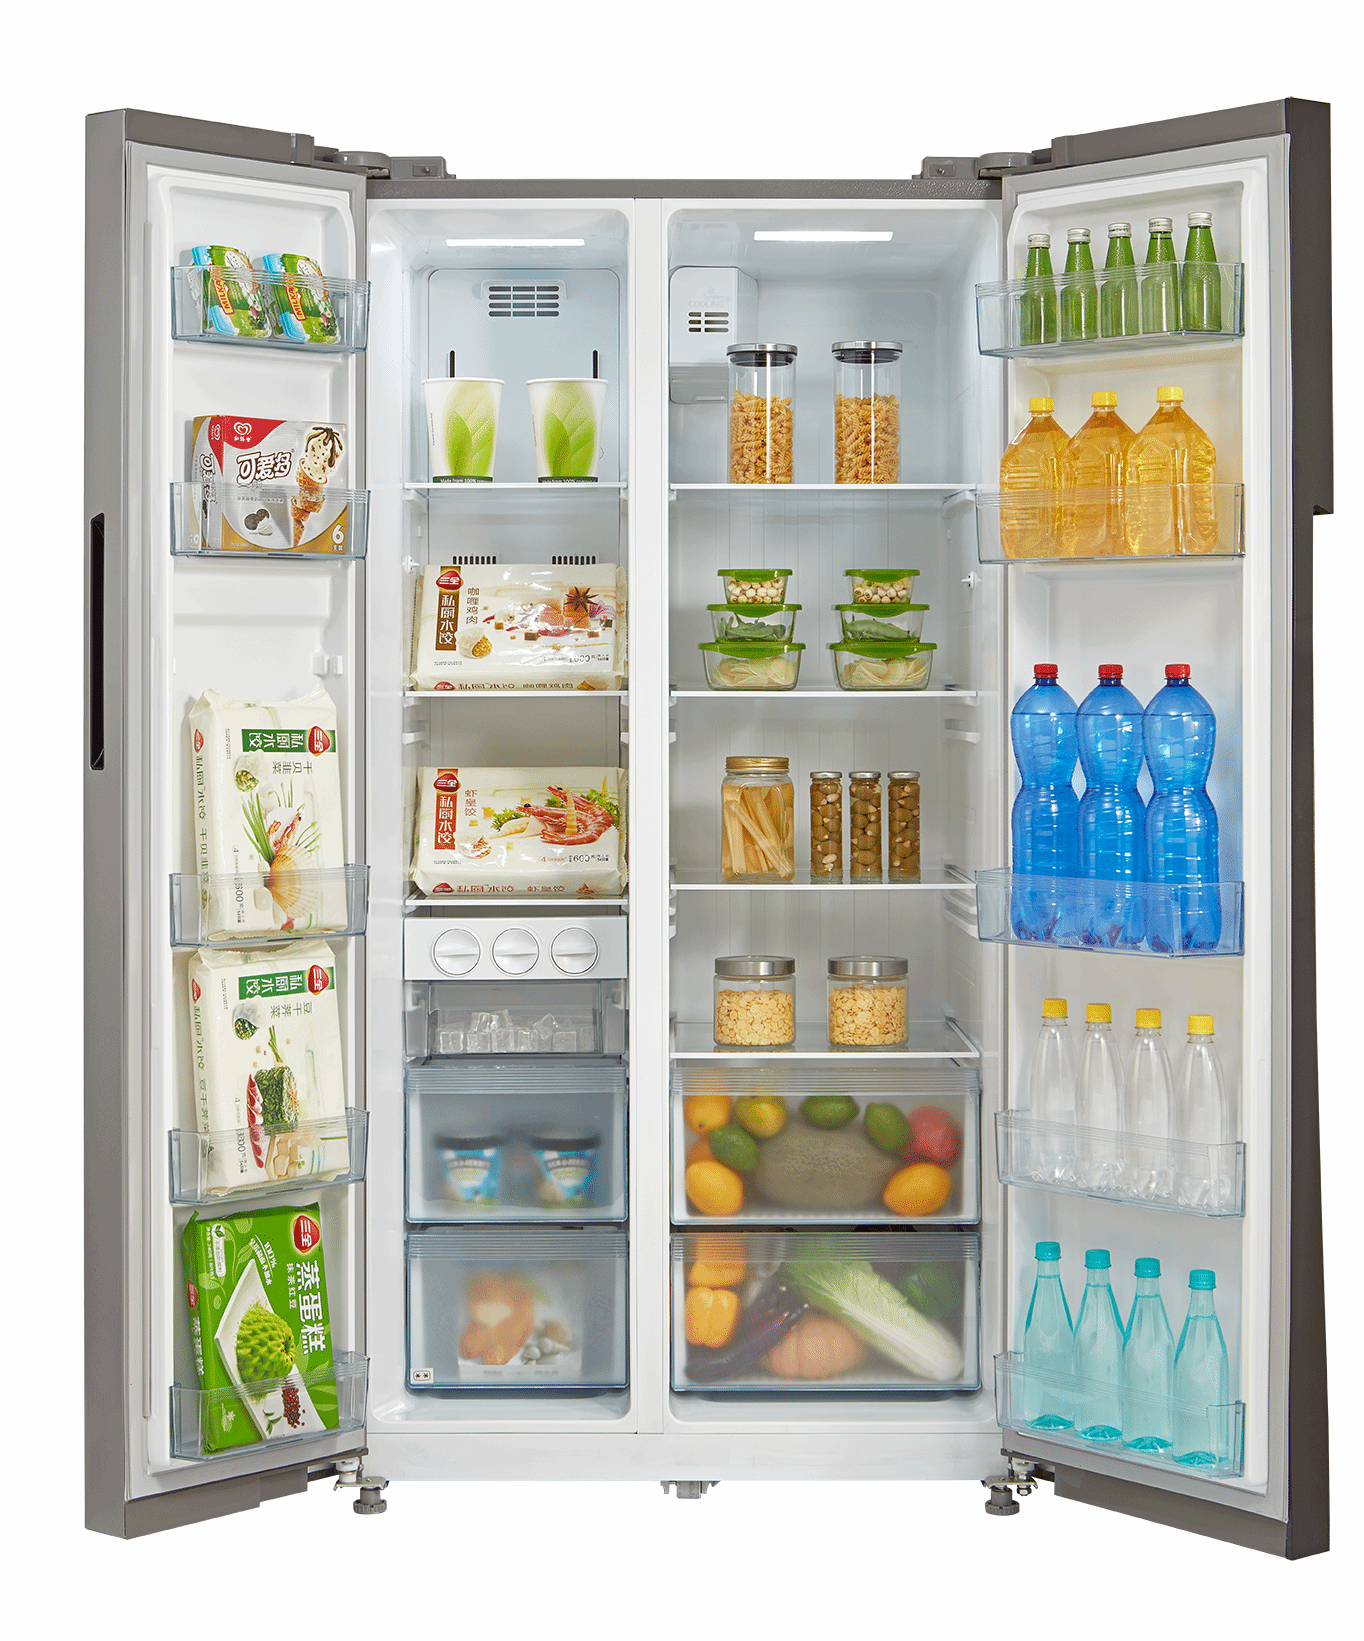 Buy Midea 482 L Side by Side Refrigerator online in India